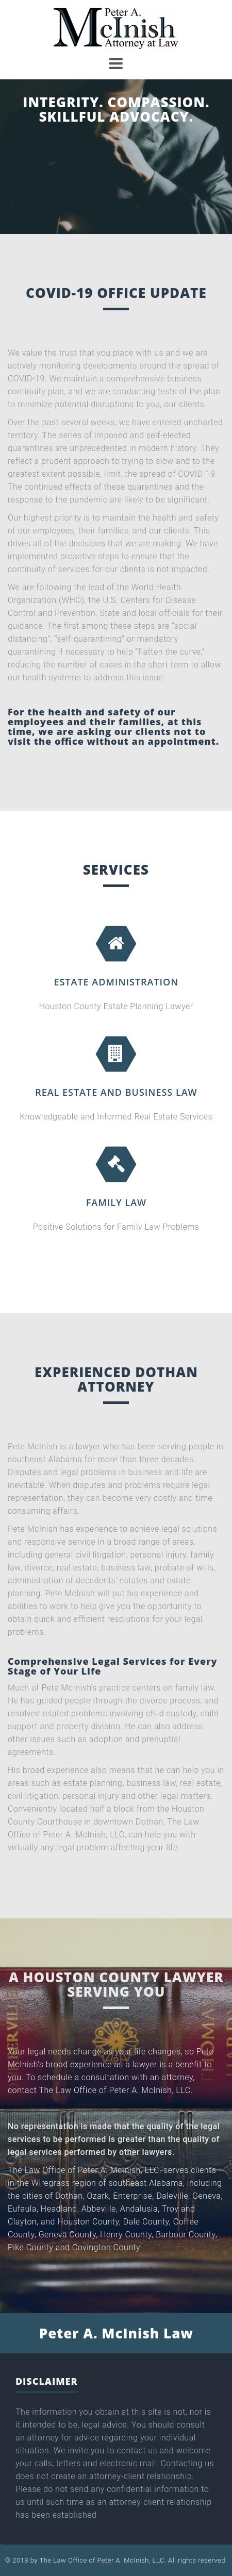 The Law Office of Peter A. McInish, LLC - Dothan AL Lawyers